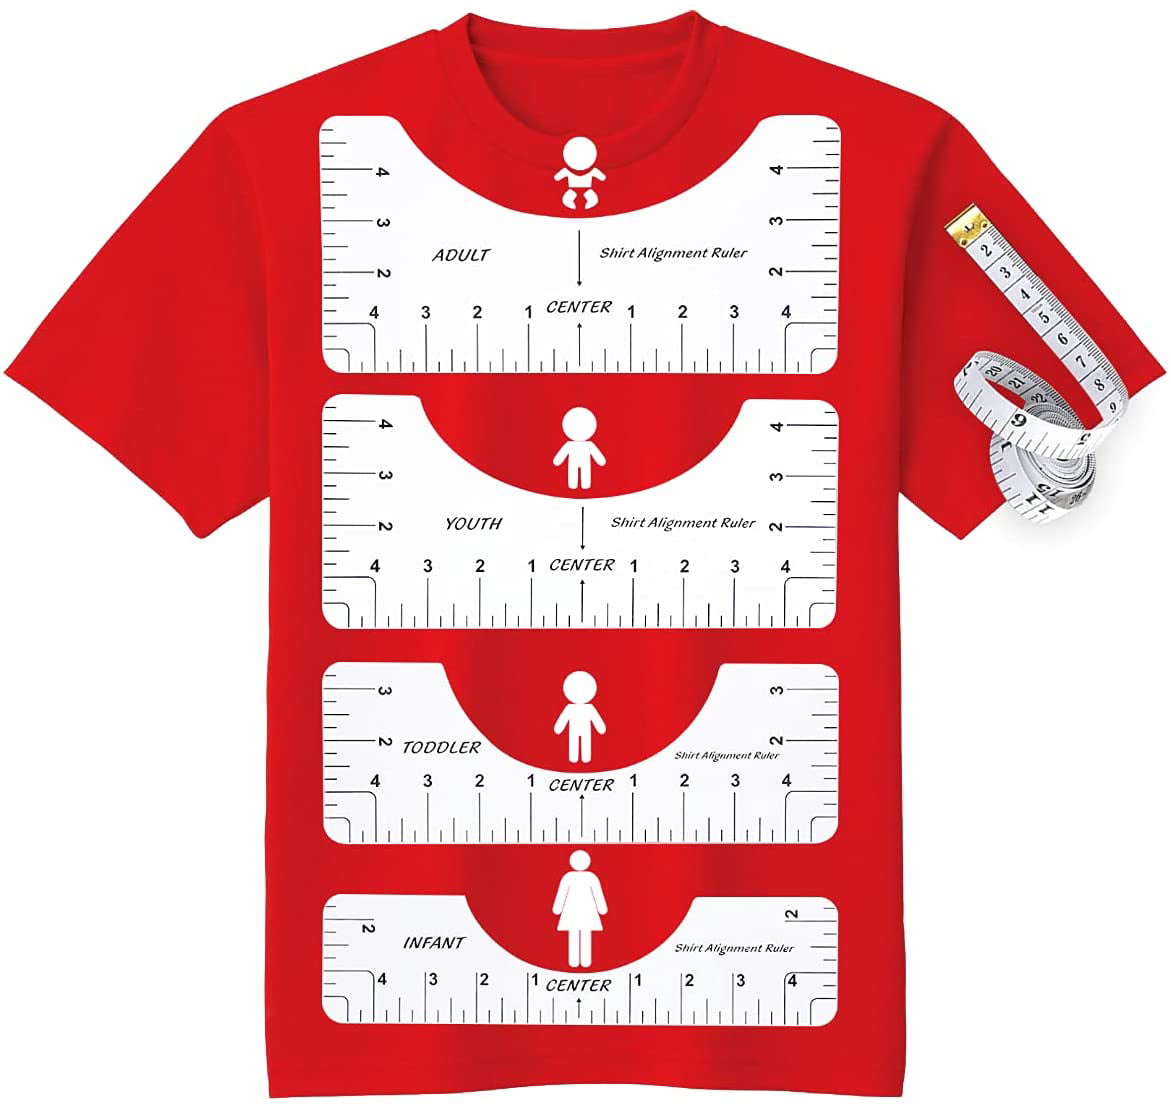 T-Shirt Alignment Rulers to Center Designs Suitable for Adult Youth Toddler Infant Craft Ruler With Guiding Tool for Vinyl Placement Heat Press Cricut Sublimation 7pcs T-Shirt Ruler Guide Set 